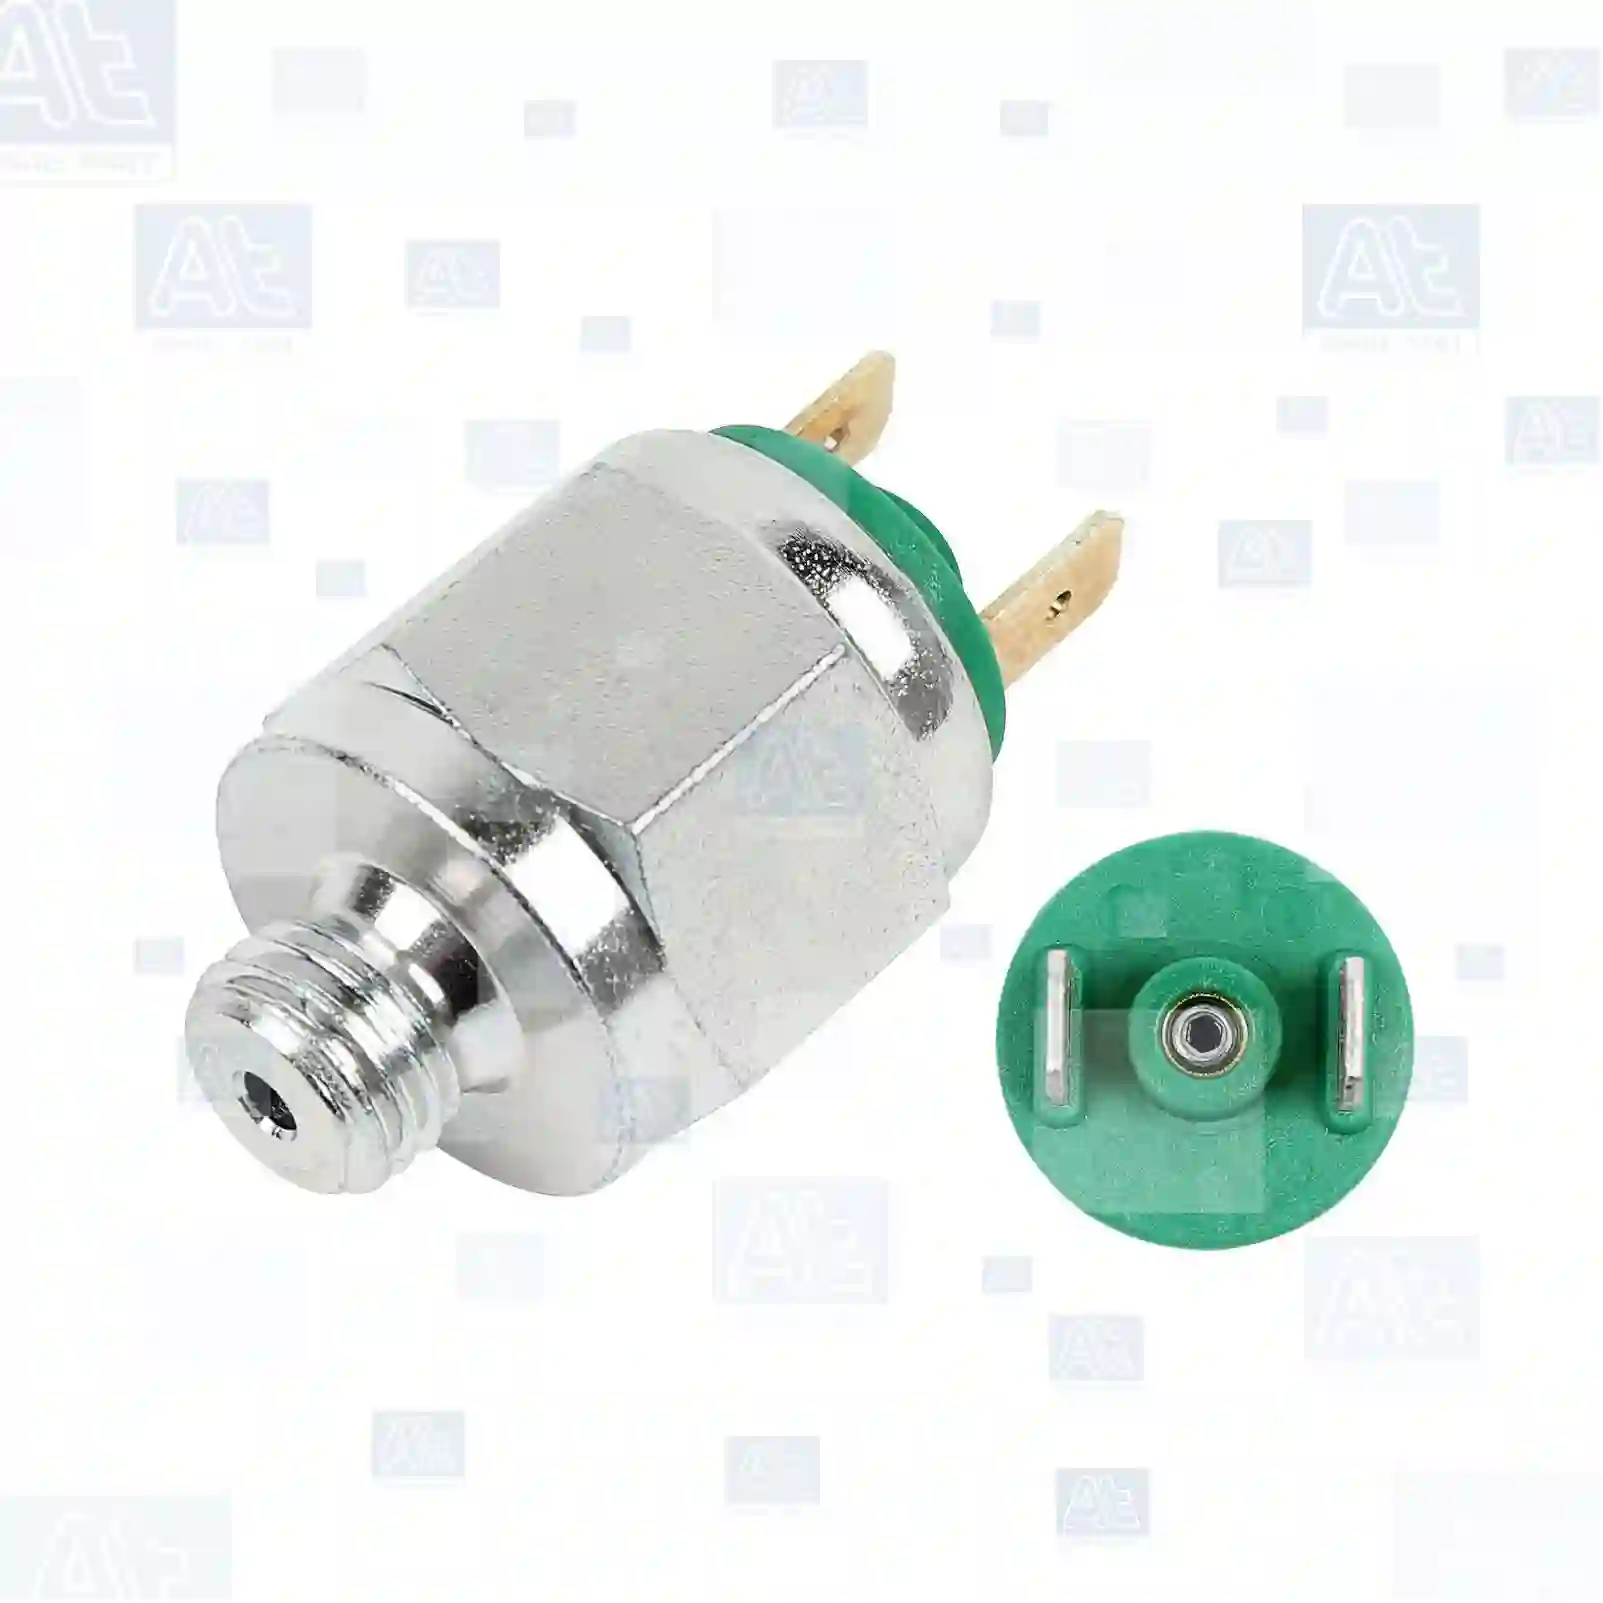 Pressure switch, 77710204, 1332000, 1504932, 1505470, ACHA101, 99700725031, 250045, 03435124, 03435125, 03455124, 3435124, 9441004004, 9441014004, 342025, 81255216013, 81255216019, 88255216208, 90810135242, K0002809687, 0007631710, 0015456024, 011017512, 110278600, 13C3508170AA, 9900005132AA, 5021170115, 1934563, 297807, 393101, 394328, 7314016000, 18026840, 21090340, 96906400, 637201260, 637205120, 1132028, 5236537, 6228623, 6628623, ZG20759-0008 ||  77710204 At Spare Part | Engine, Accelerator Pedal, Camshaft, Connecting Rod, Crankcase, Crankshaft, Cylinder Head, Engine Suspension Mountings, Exhaust Manifold, Exhaust Gas Recirculation, Filter Kits, Flywheel Housing, General Overhaul Kits, Engine, Intake Manifold, Oil Cleaner, Oil Cooler, Oil Filter, Oil Pump, Oil Sump, Piston & Liner, Sensor & Switch, Timing Case, Turbocharger, Cooling System, Belt Tensioner, Coolant Filter, Coolant Pipe, Corrosion Prevention Agent, Drive, Expansion Tank, Fan, Intercooler, Monitors & Gauges, Radiator, Thermostat, V-Belt / Timing belt, Water Pump, Fuel System, Electronical Injector Unit, Feed Pump, Fuel Filter, cpl., Fuel Gauge Sender,  Fuel Line, Fuel Pump, Fuel Tank, Injection Line Kit, Injection Pump, Exhaust System, Clutch & Pedal, Gearbox, Propeller Shaft, Axles, Brake System, Hubs & Wheels, Suspension, Leaf Spring, Universal Parts / Accessories, Steering, Electrical System, Cabin Pressure switch, 77710204, 1332000, 1504932, 1505470, ACHA101, 99700725031, 250045, 03435124, 03435125, 03455124, 3435124, 9441004004, 9441014004, 342025, 81255216013, 81255216019, 88255216208, 90810135242, K0002809687, 0007631710, 0015456024, 011017512, 110278600, 13C3508170AA, 9900005132AA, 5021170115, 1934563, 297807, 393101, 394328, 7314016000, 18026840, 21090340, 96906400, 637201260, 637205120, 1132028, 5236537, 6228623, 6628623, ZG20759-0008 ||  77710204 At Spare Part | Engine, Accelerator Pedal, Camshaft, Connecting Rod, Crankcase, Crankshaft, Cylinder Head, Engine Suspension Mountings, Exhaust Manifold, Exhaust Gas Recirculation, Filter Kits, Flywheel Housing, General Overhaul Kits, Engine, Intake Manifold, Oil Cleaner, Oil Cooler, Oil Filter, Oil Pump, Oil Sump, Piston & Liner, Sensor & Switch, Timing Case, Turbocharger, Cooling System, Belt Tensioner, Coolant Filter, Coolant Pipe, Corrosion Prevention Agent, Drive, Expansion Tank, Fan, Intercooler, Monitors & Gauges, Radiator, Thermostat, V-Belt / Timing belt, Water Pump, Fuel System, Electronical Injector Unit, Feed Pump, Fuel Filter, cpl., Fuel Gauge Sender,  Fuel Line, Fuel Pump, Fuel Tank, Injection Line Kit, Injection Pump, Exhaust System, Clutch & Pedal, Gearbox, Propeller Shaft, Axles, Brake System, Hubs & Wheels, Suspension, Leaf Spring, Universal Parts / Accessories, Steering, Electrical System, Cabin